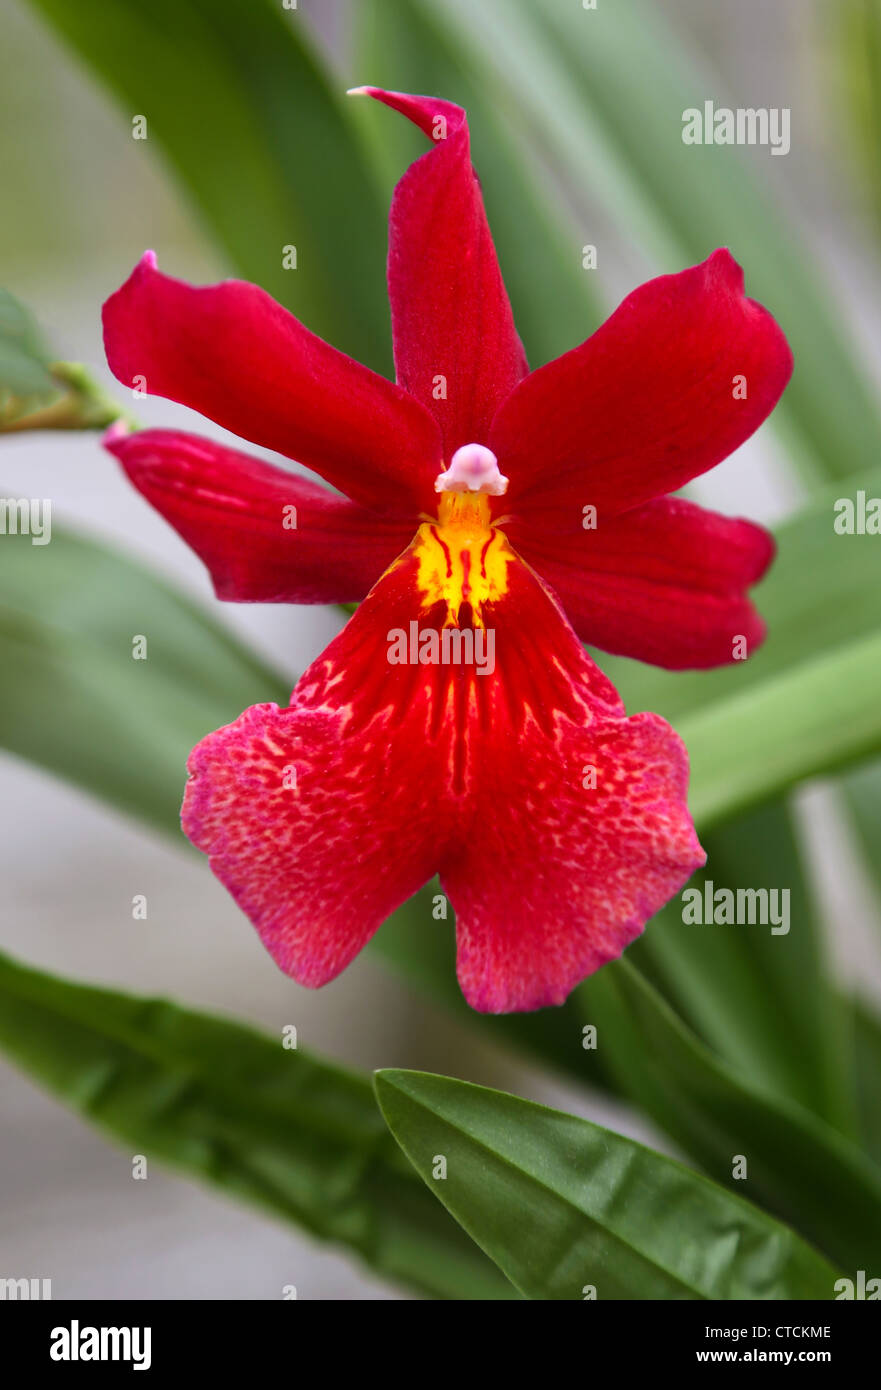 Cambria - Burrageara Nelly Isler orchid hybrid red flower blooming Stock Photo